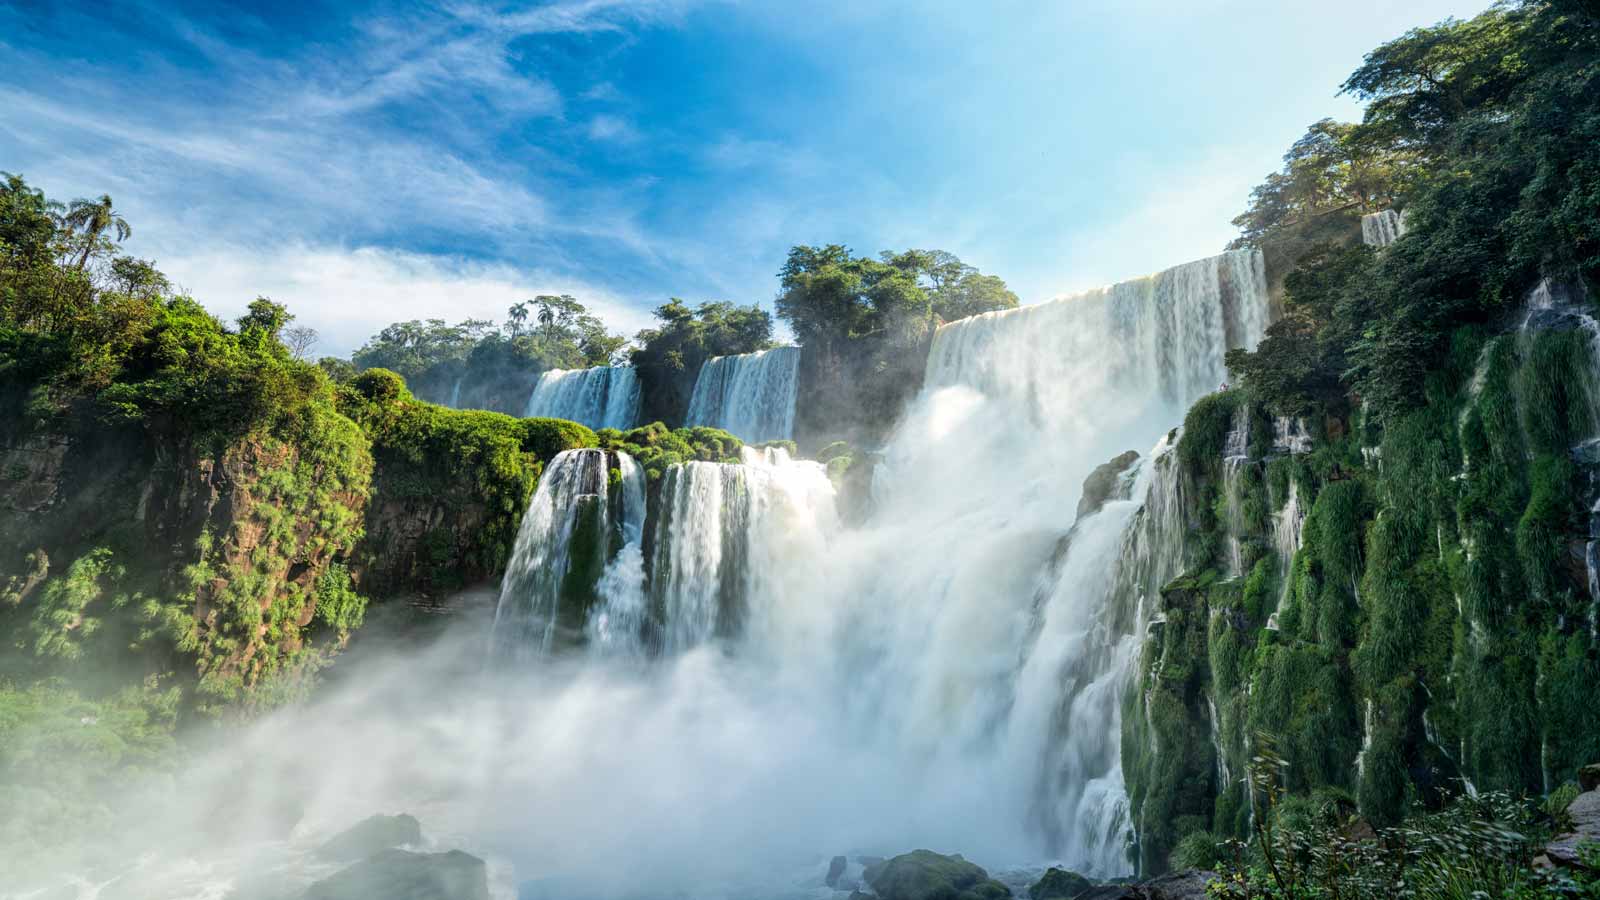 <p><span>Straddling the border of Brazil and Argentina, Iguazu Falls is the world’s largest waterfall system. It stretches just shy of two miles and features hundreds of individual waterfalls. The water plunges down approximately 230 feet, creating a breathtaking visual and auditory display. </span></p><p><span>Enveloped by a lush rainforest, the falls promise a magical, unforgettable experience. Safeguarded within a national park, Iguazu Falls is conveniently accessible from both the Argentine and Brazilian sides, ensuring a hassle-free visit.</span></p>